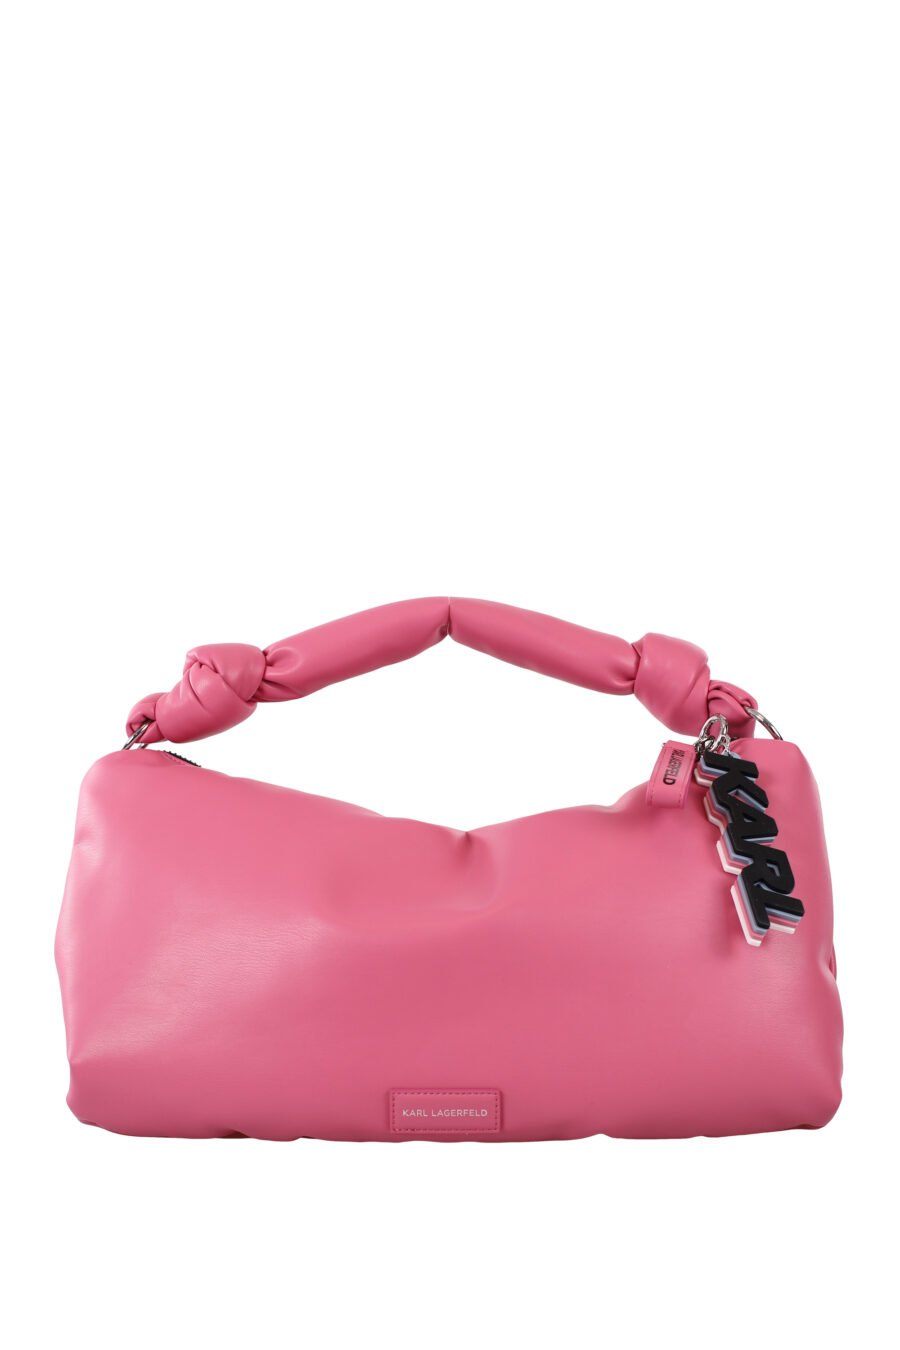 Pink knotted shoulder bag with monochrome logo - IMG 1662